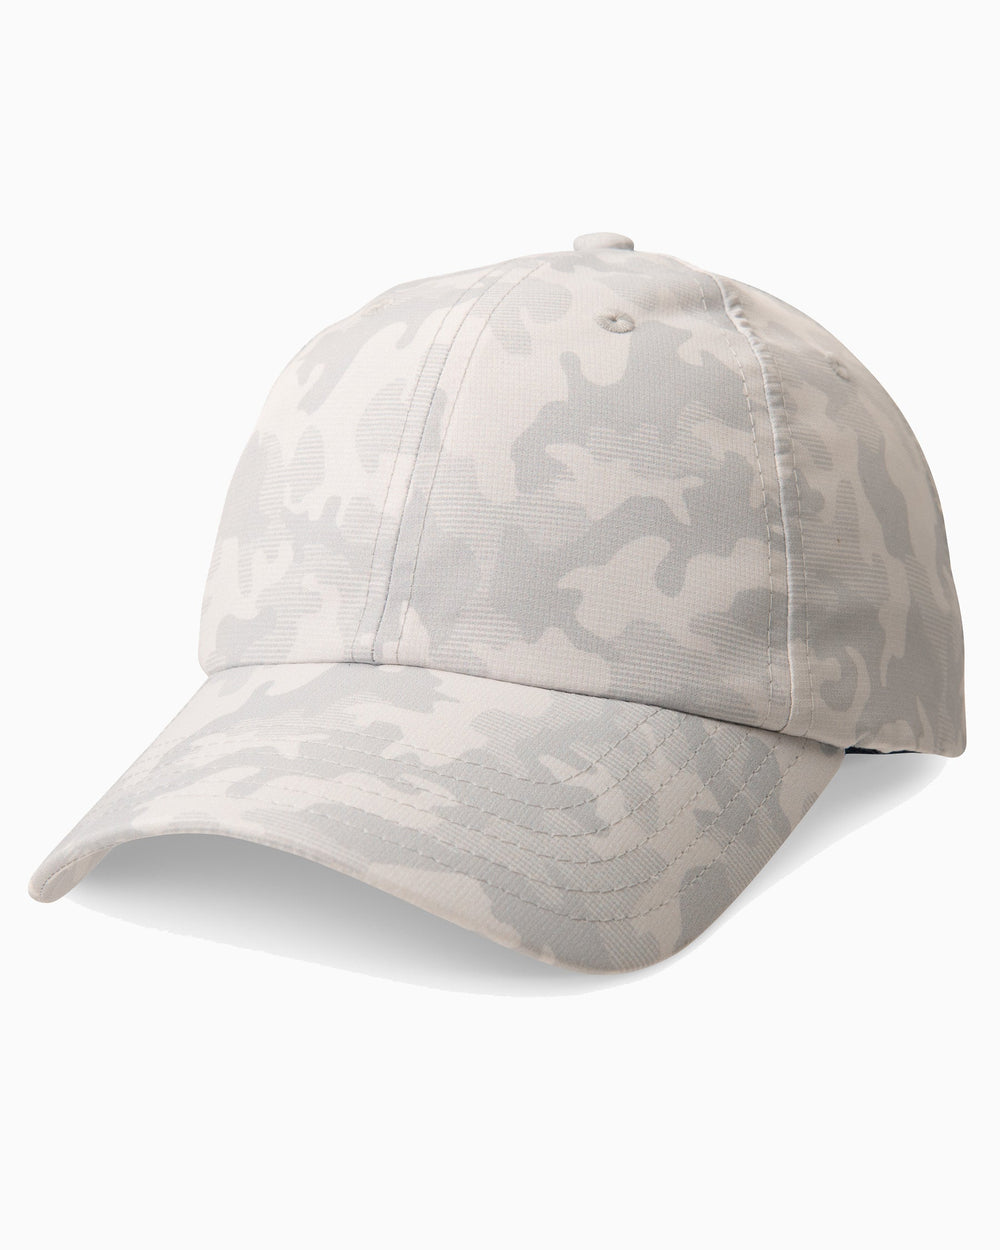 The front of the Camo Printed Performance Hat by Southern Tide - Seagull Grey